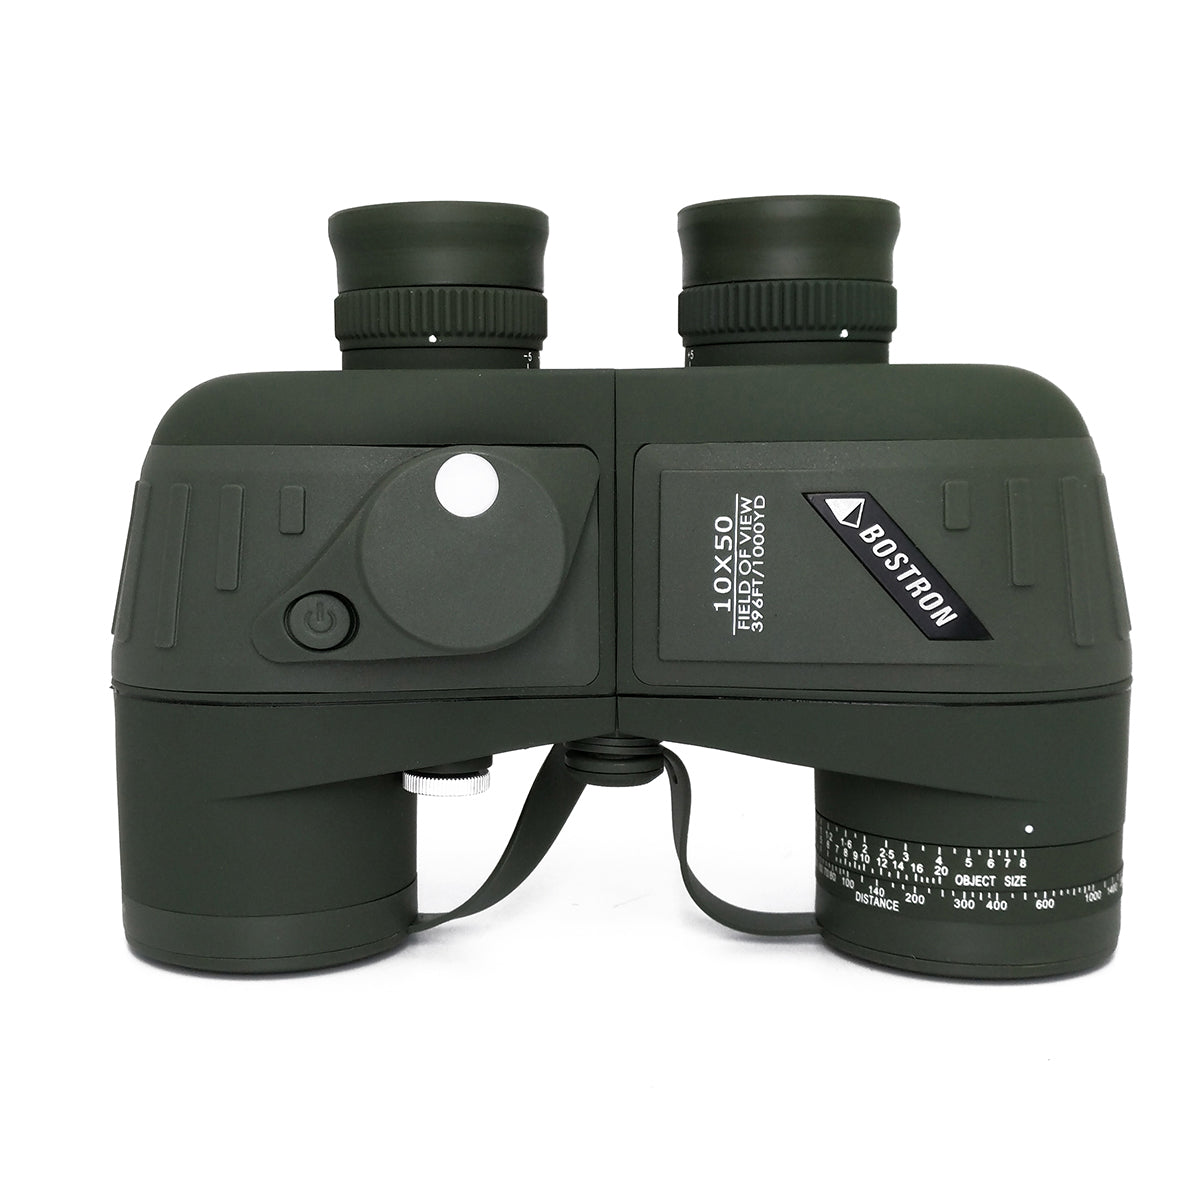 Tontube Powerful Military Binoculars 10x50 Professional with Rangefinder Compass for Hunting